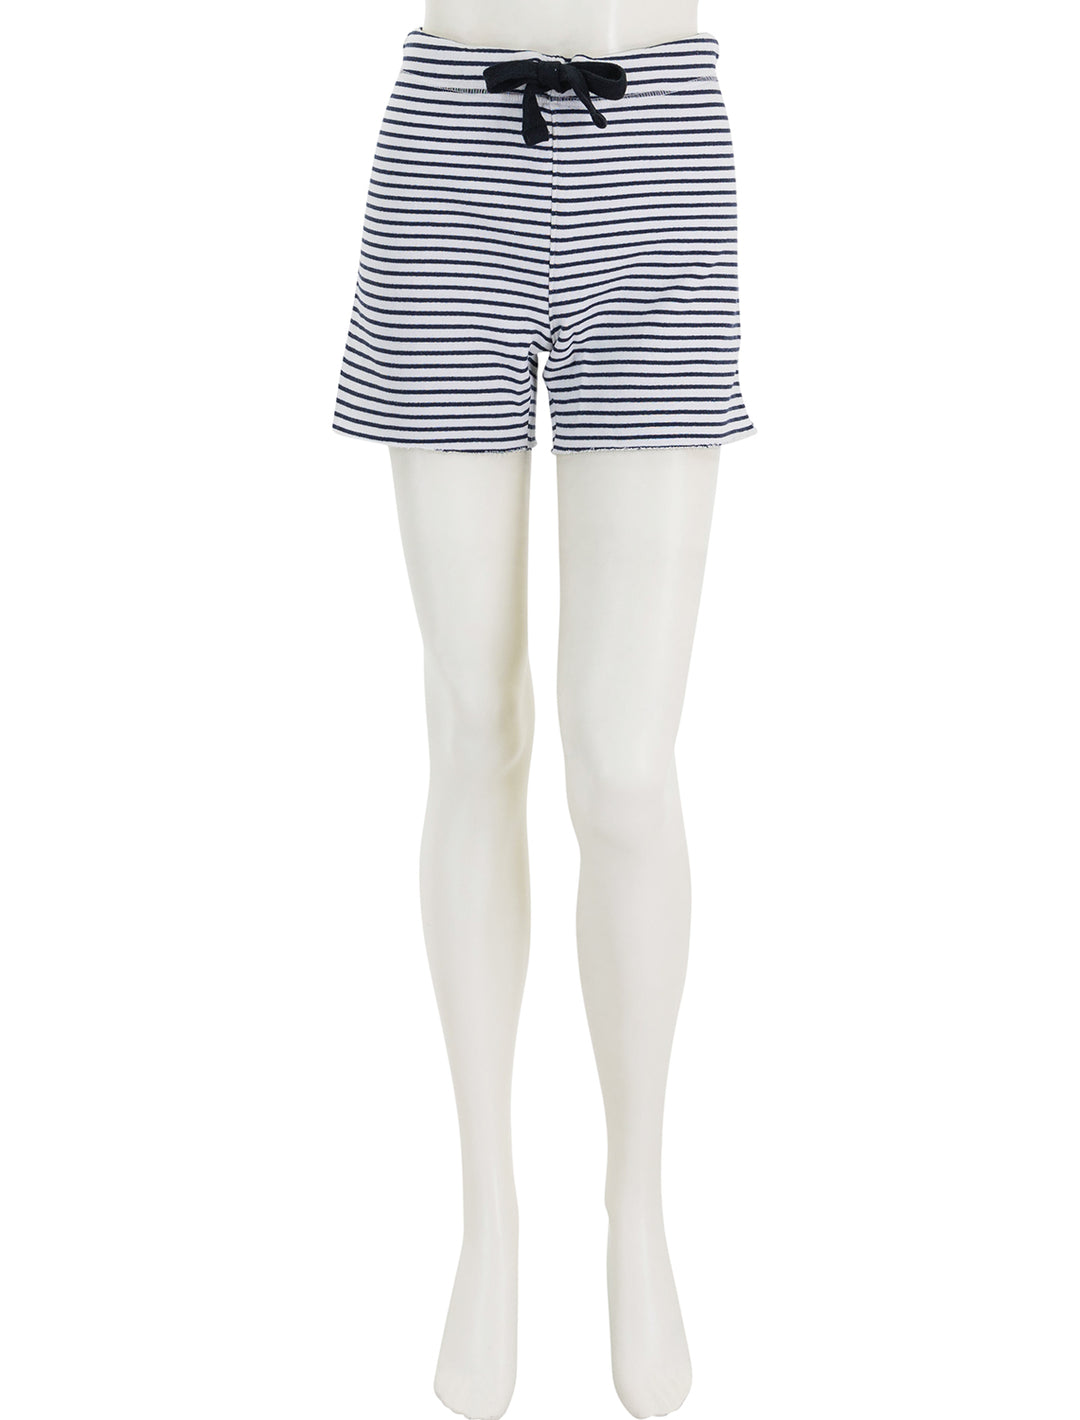 Front view of Frank & Eileen's pearl shorts in white and british royal navy stripe.